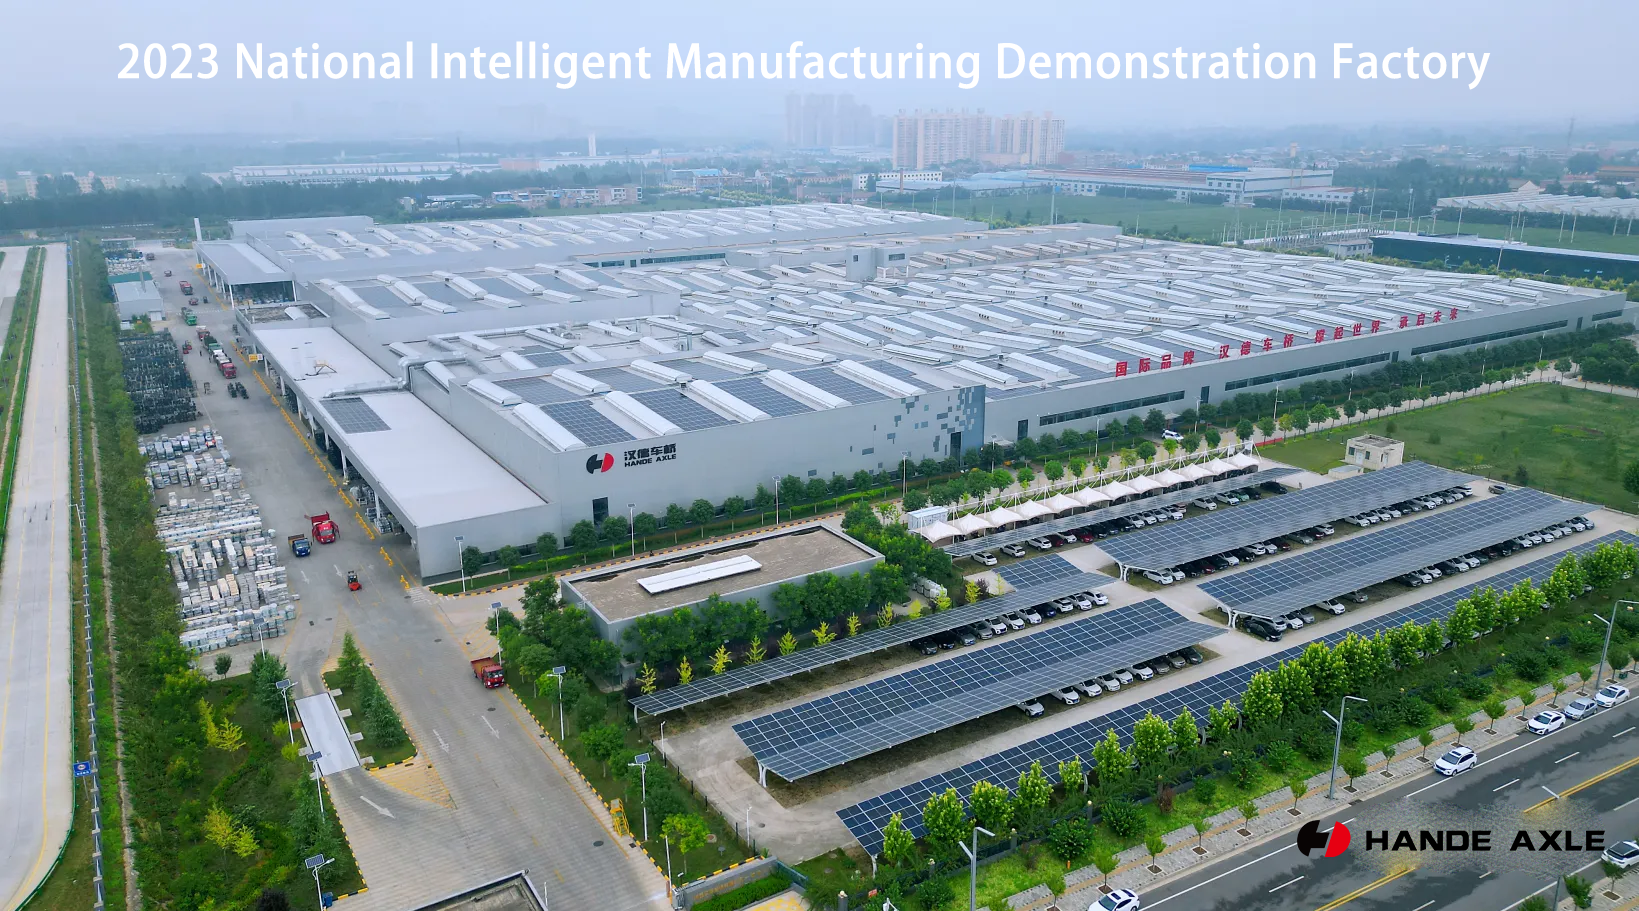 Shaanxi HanDe Axle Co., Ltd. was successfully selected as 2023 National Intelligent Manufacturing Demonstration Factory.